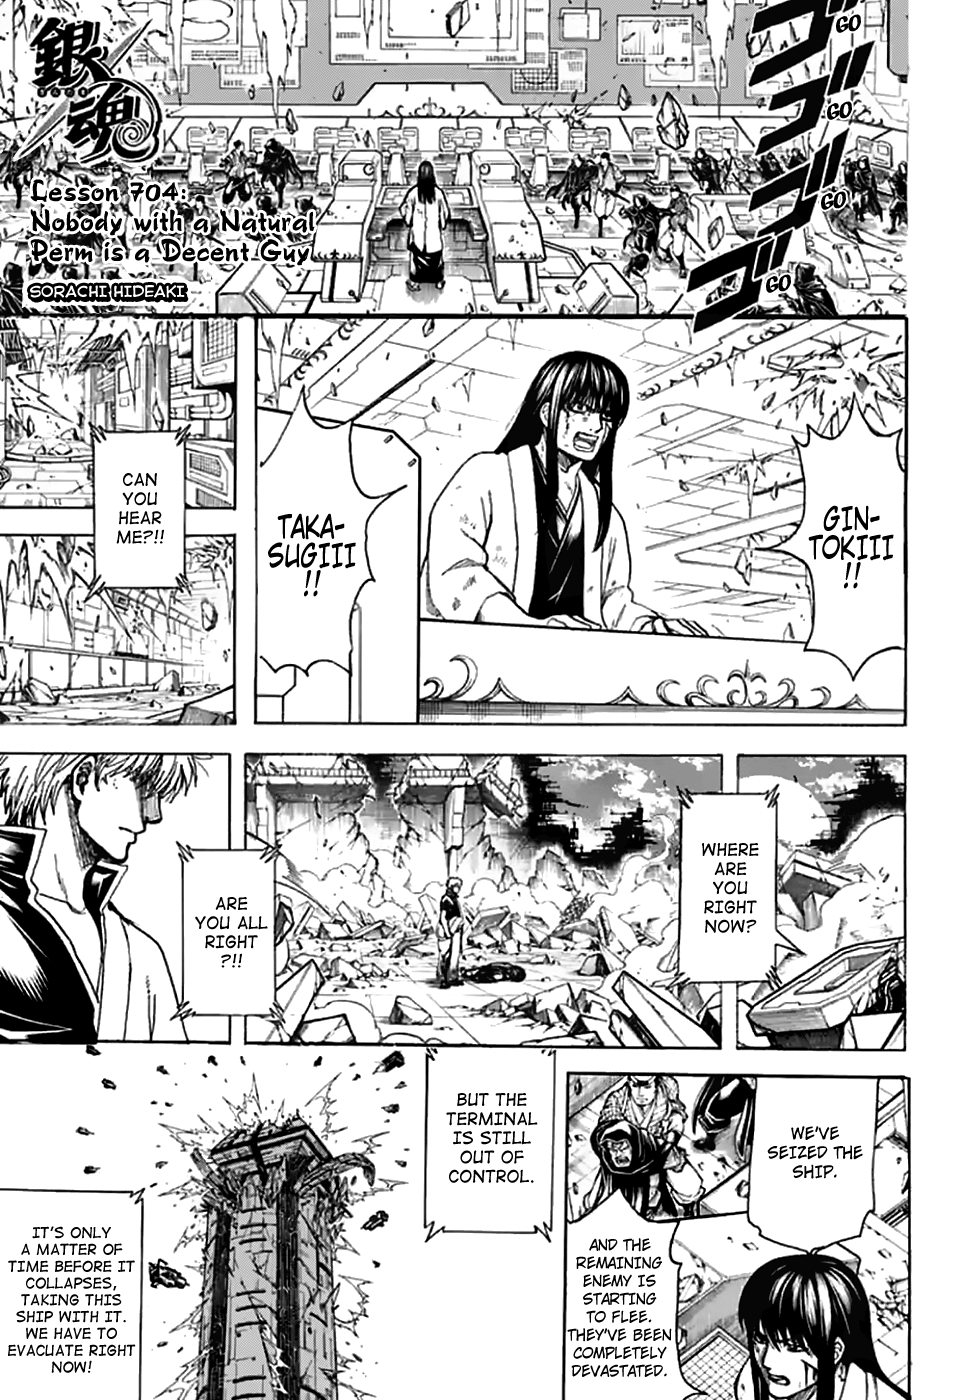 Gintama Vol.77 Chapter 704: Nobody With A Natural Perm Is A Decent Guy - Picture 1